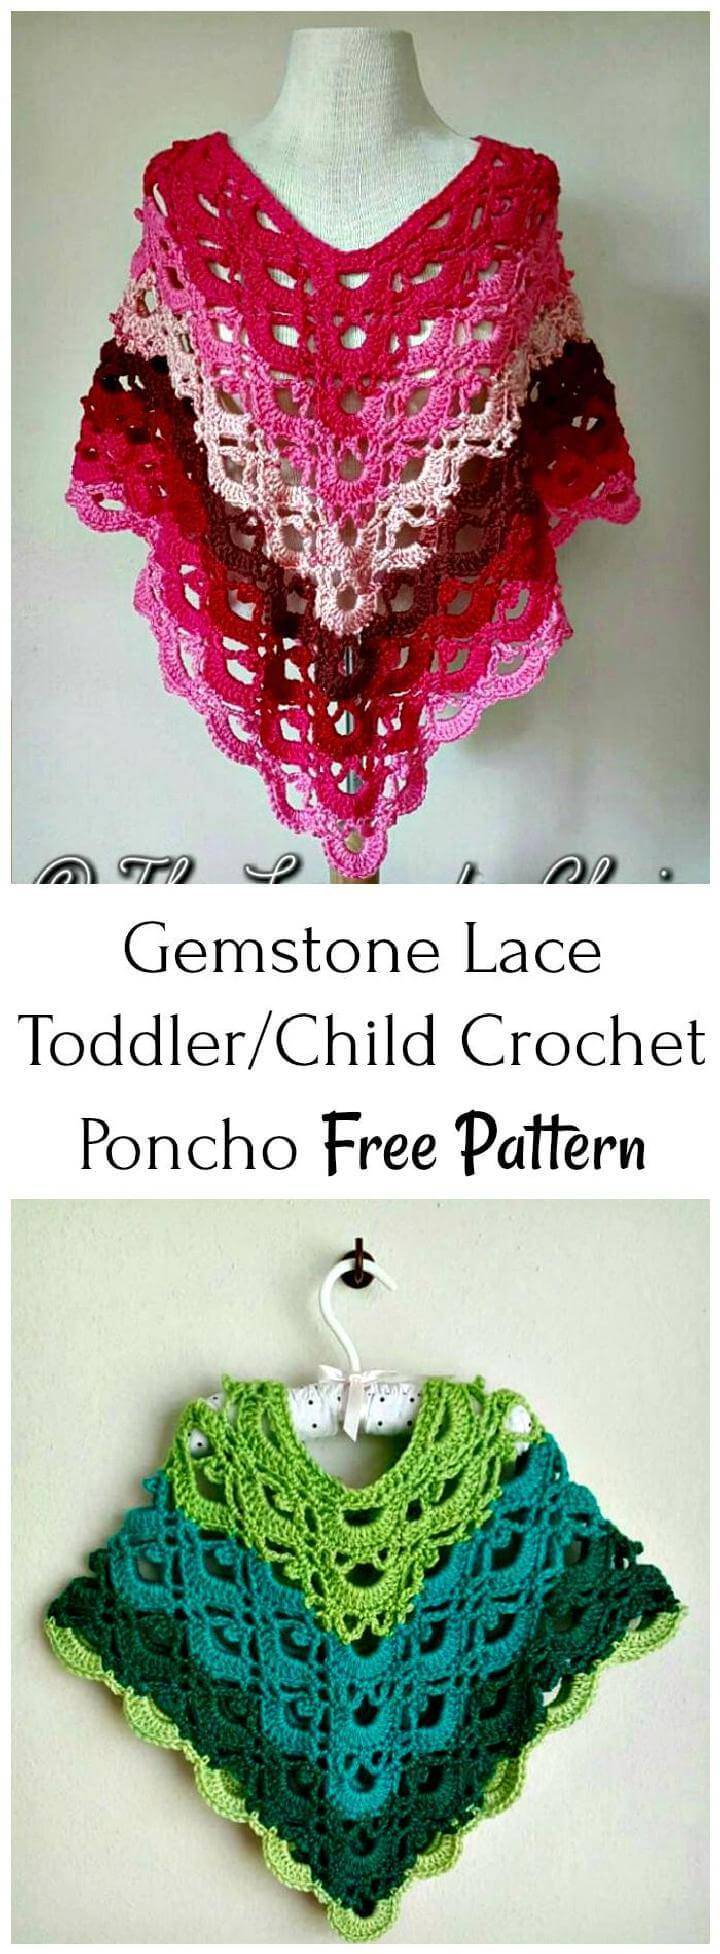 Greenstone Lace toddler or Child Crochet Poncho